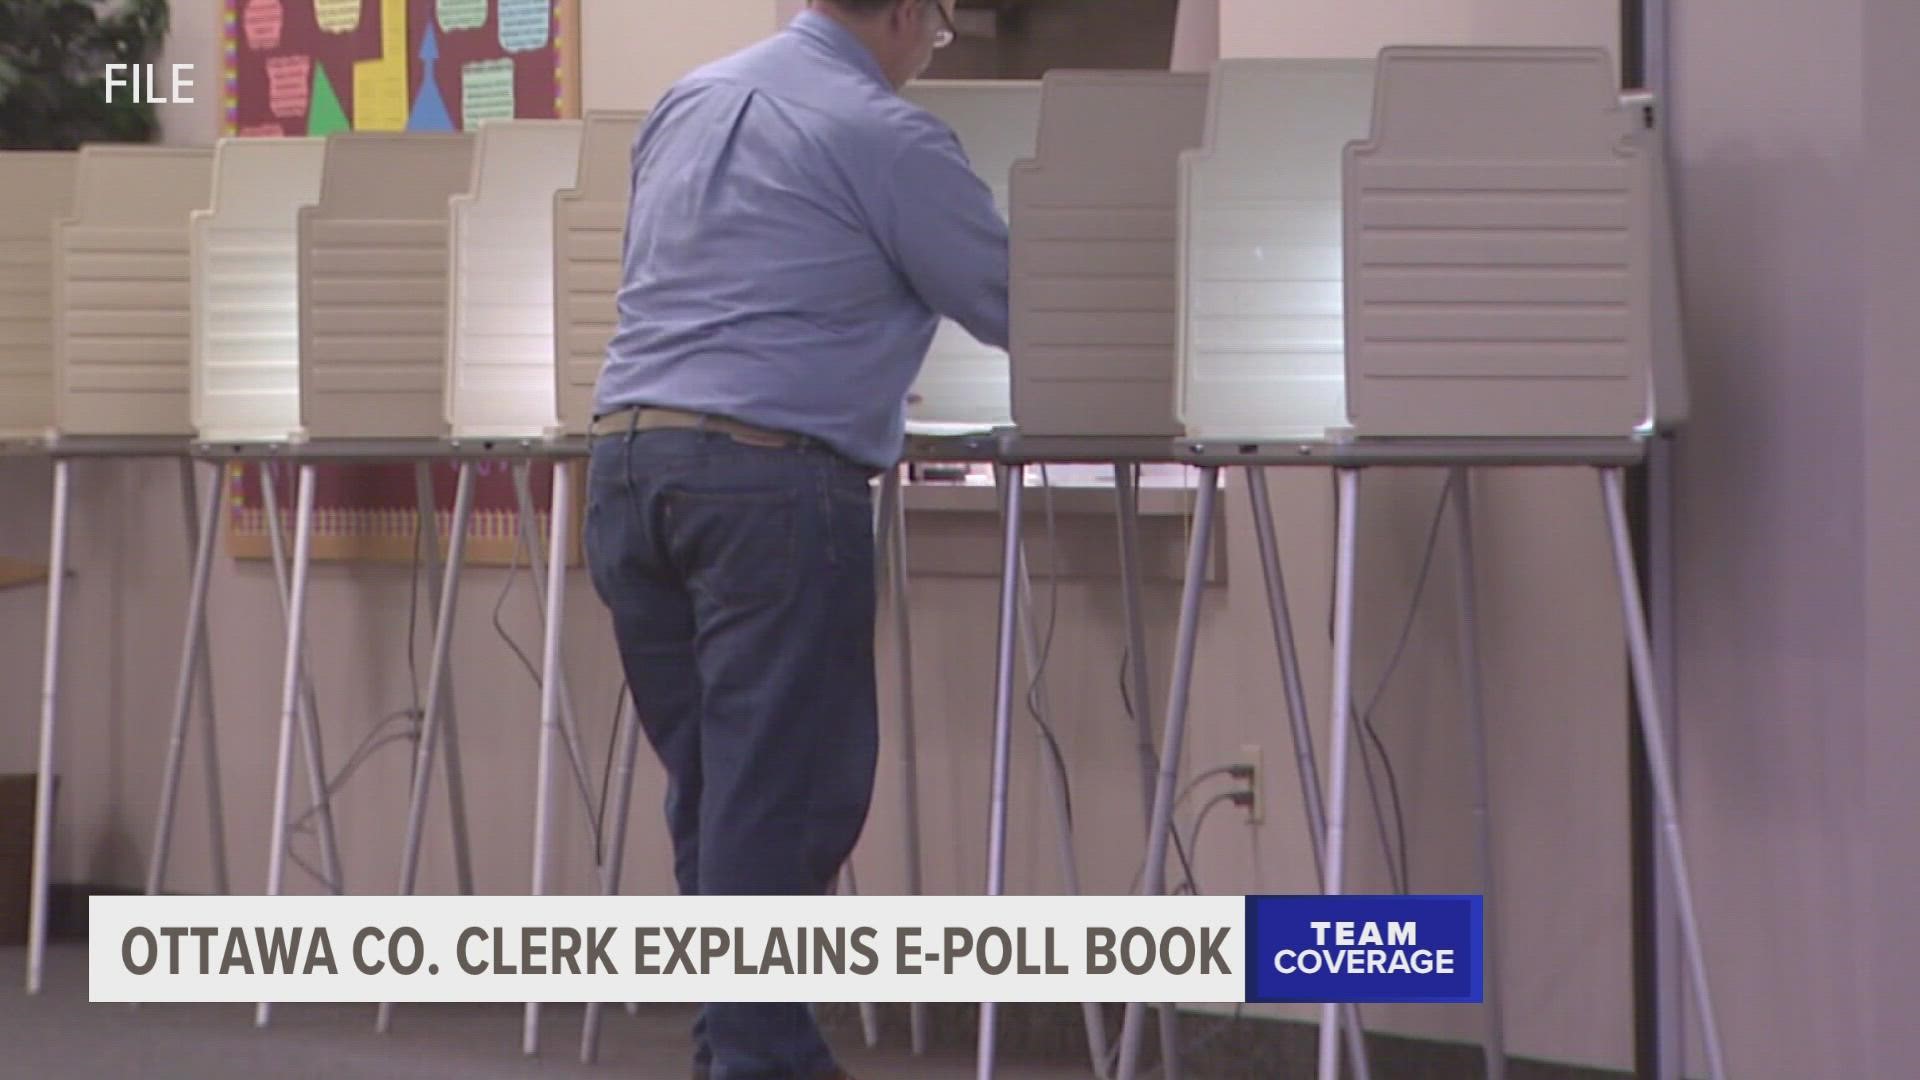 Ottawa County Clerk Justin Roebuck wants to assure voters that their ballots and information are safe and secure. He spent the day checking their voting equipment.